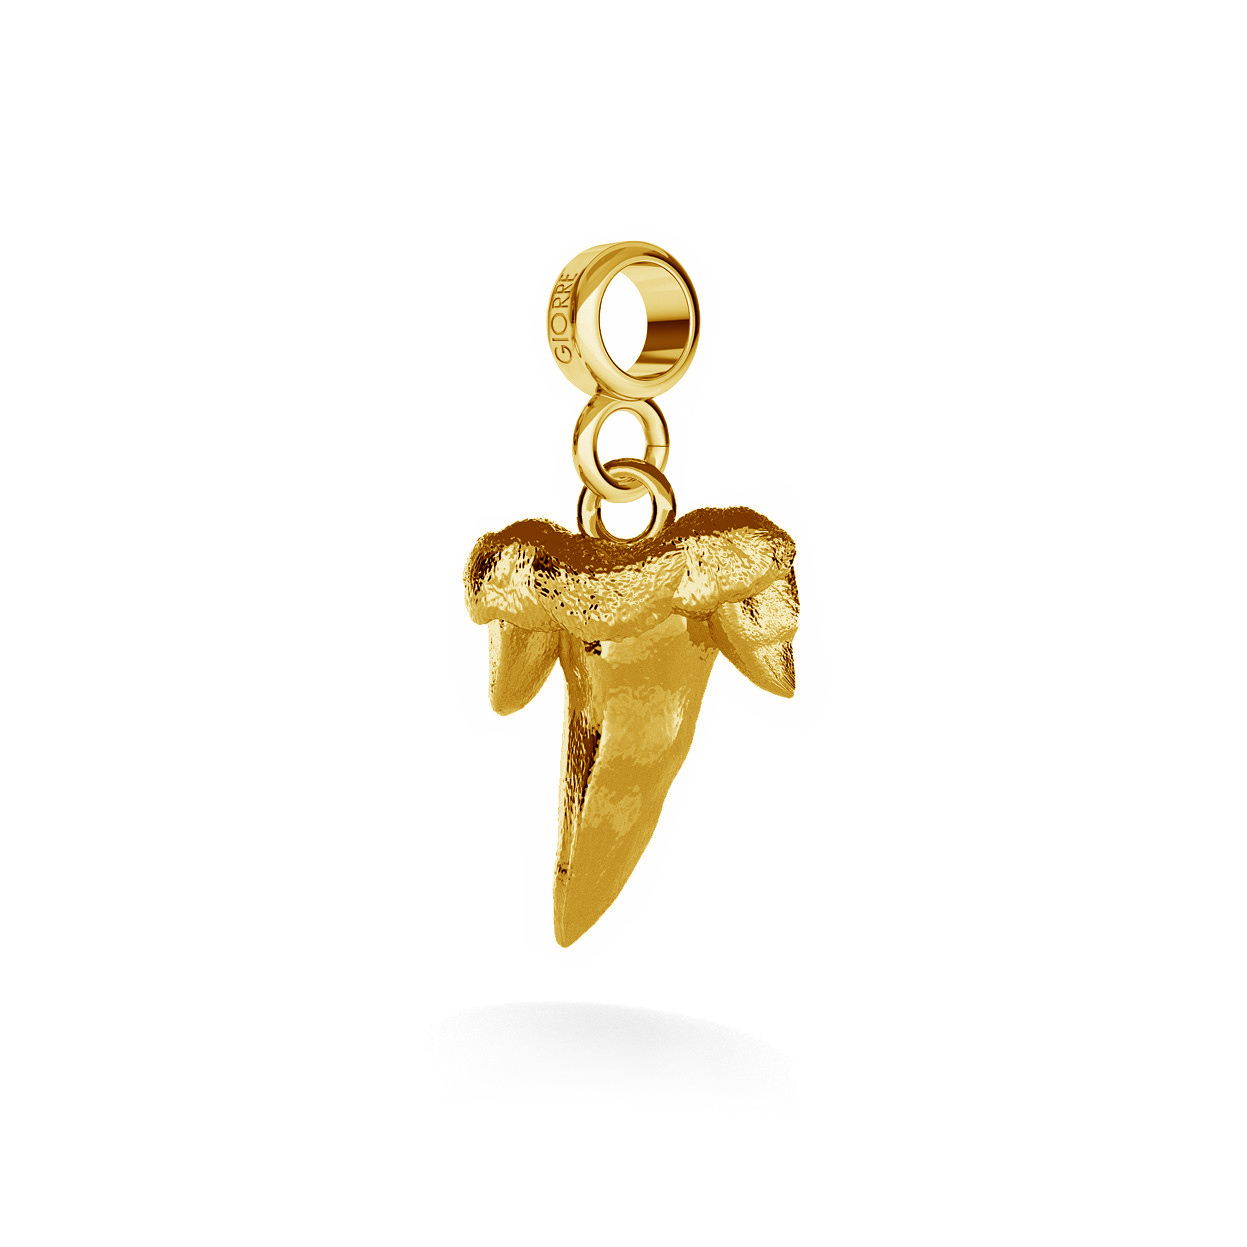 CHARM 18, TOOTH SHARK, SILVER 925, RHODIUM OR GOLD PLATED